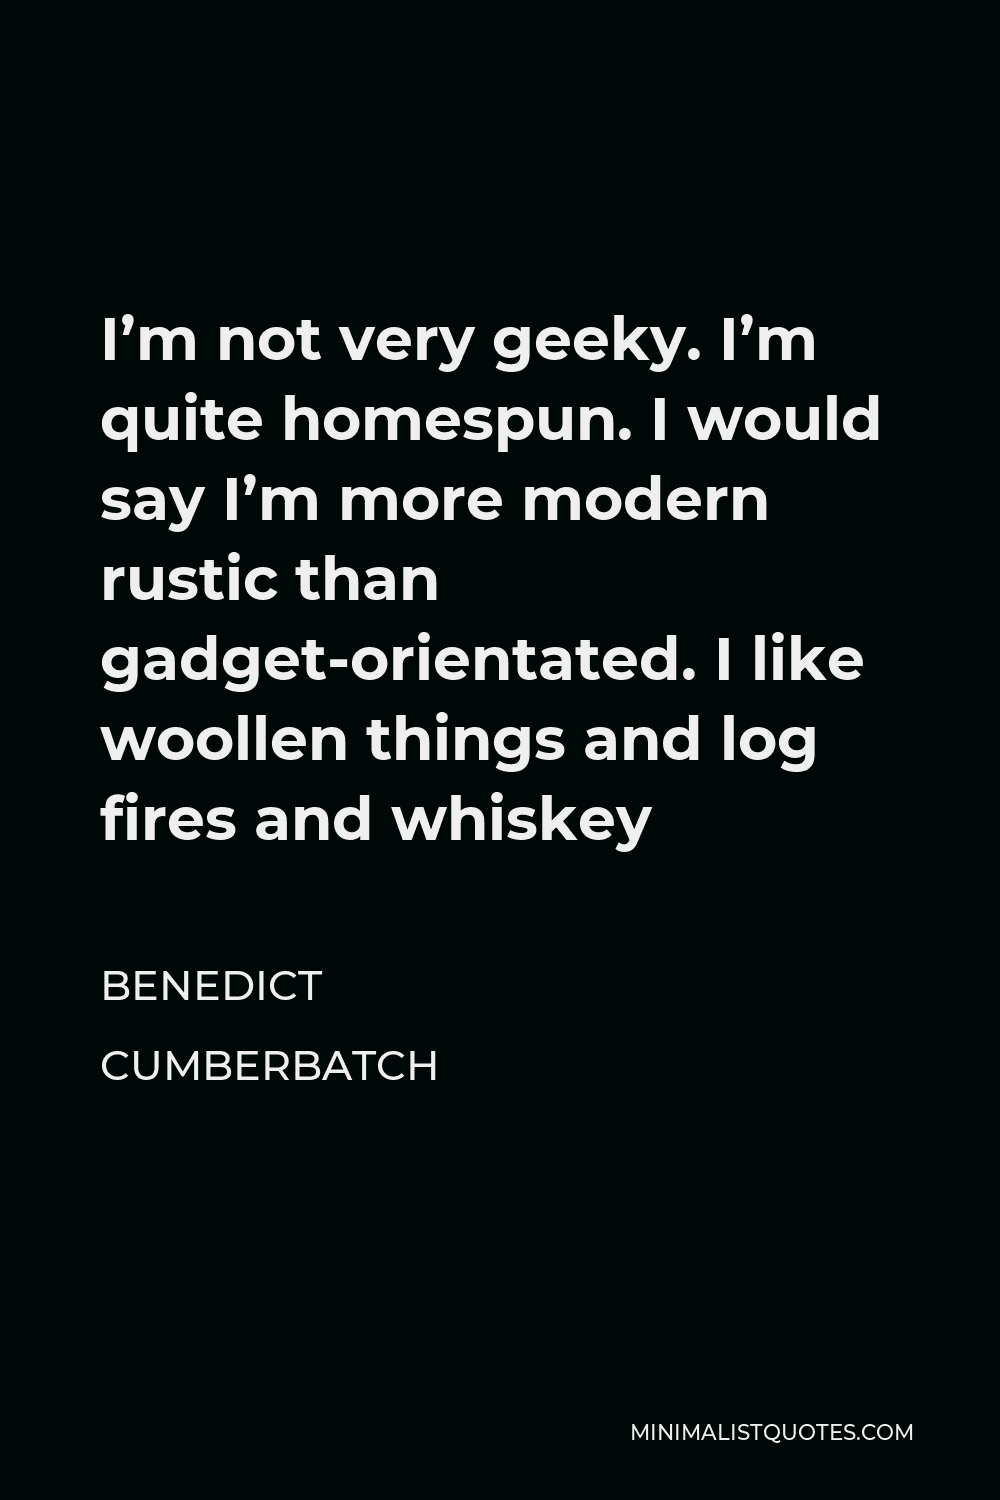 Benedict Cumberbatch Quote - I’m not very geeky. I’m quite homespun. I would say I’m more modern rustic than gadget-orientated. I like woollen things and log fires and whiskey